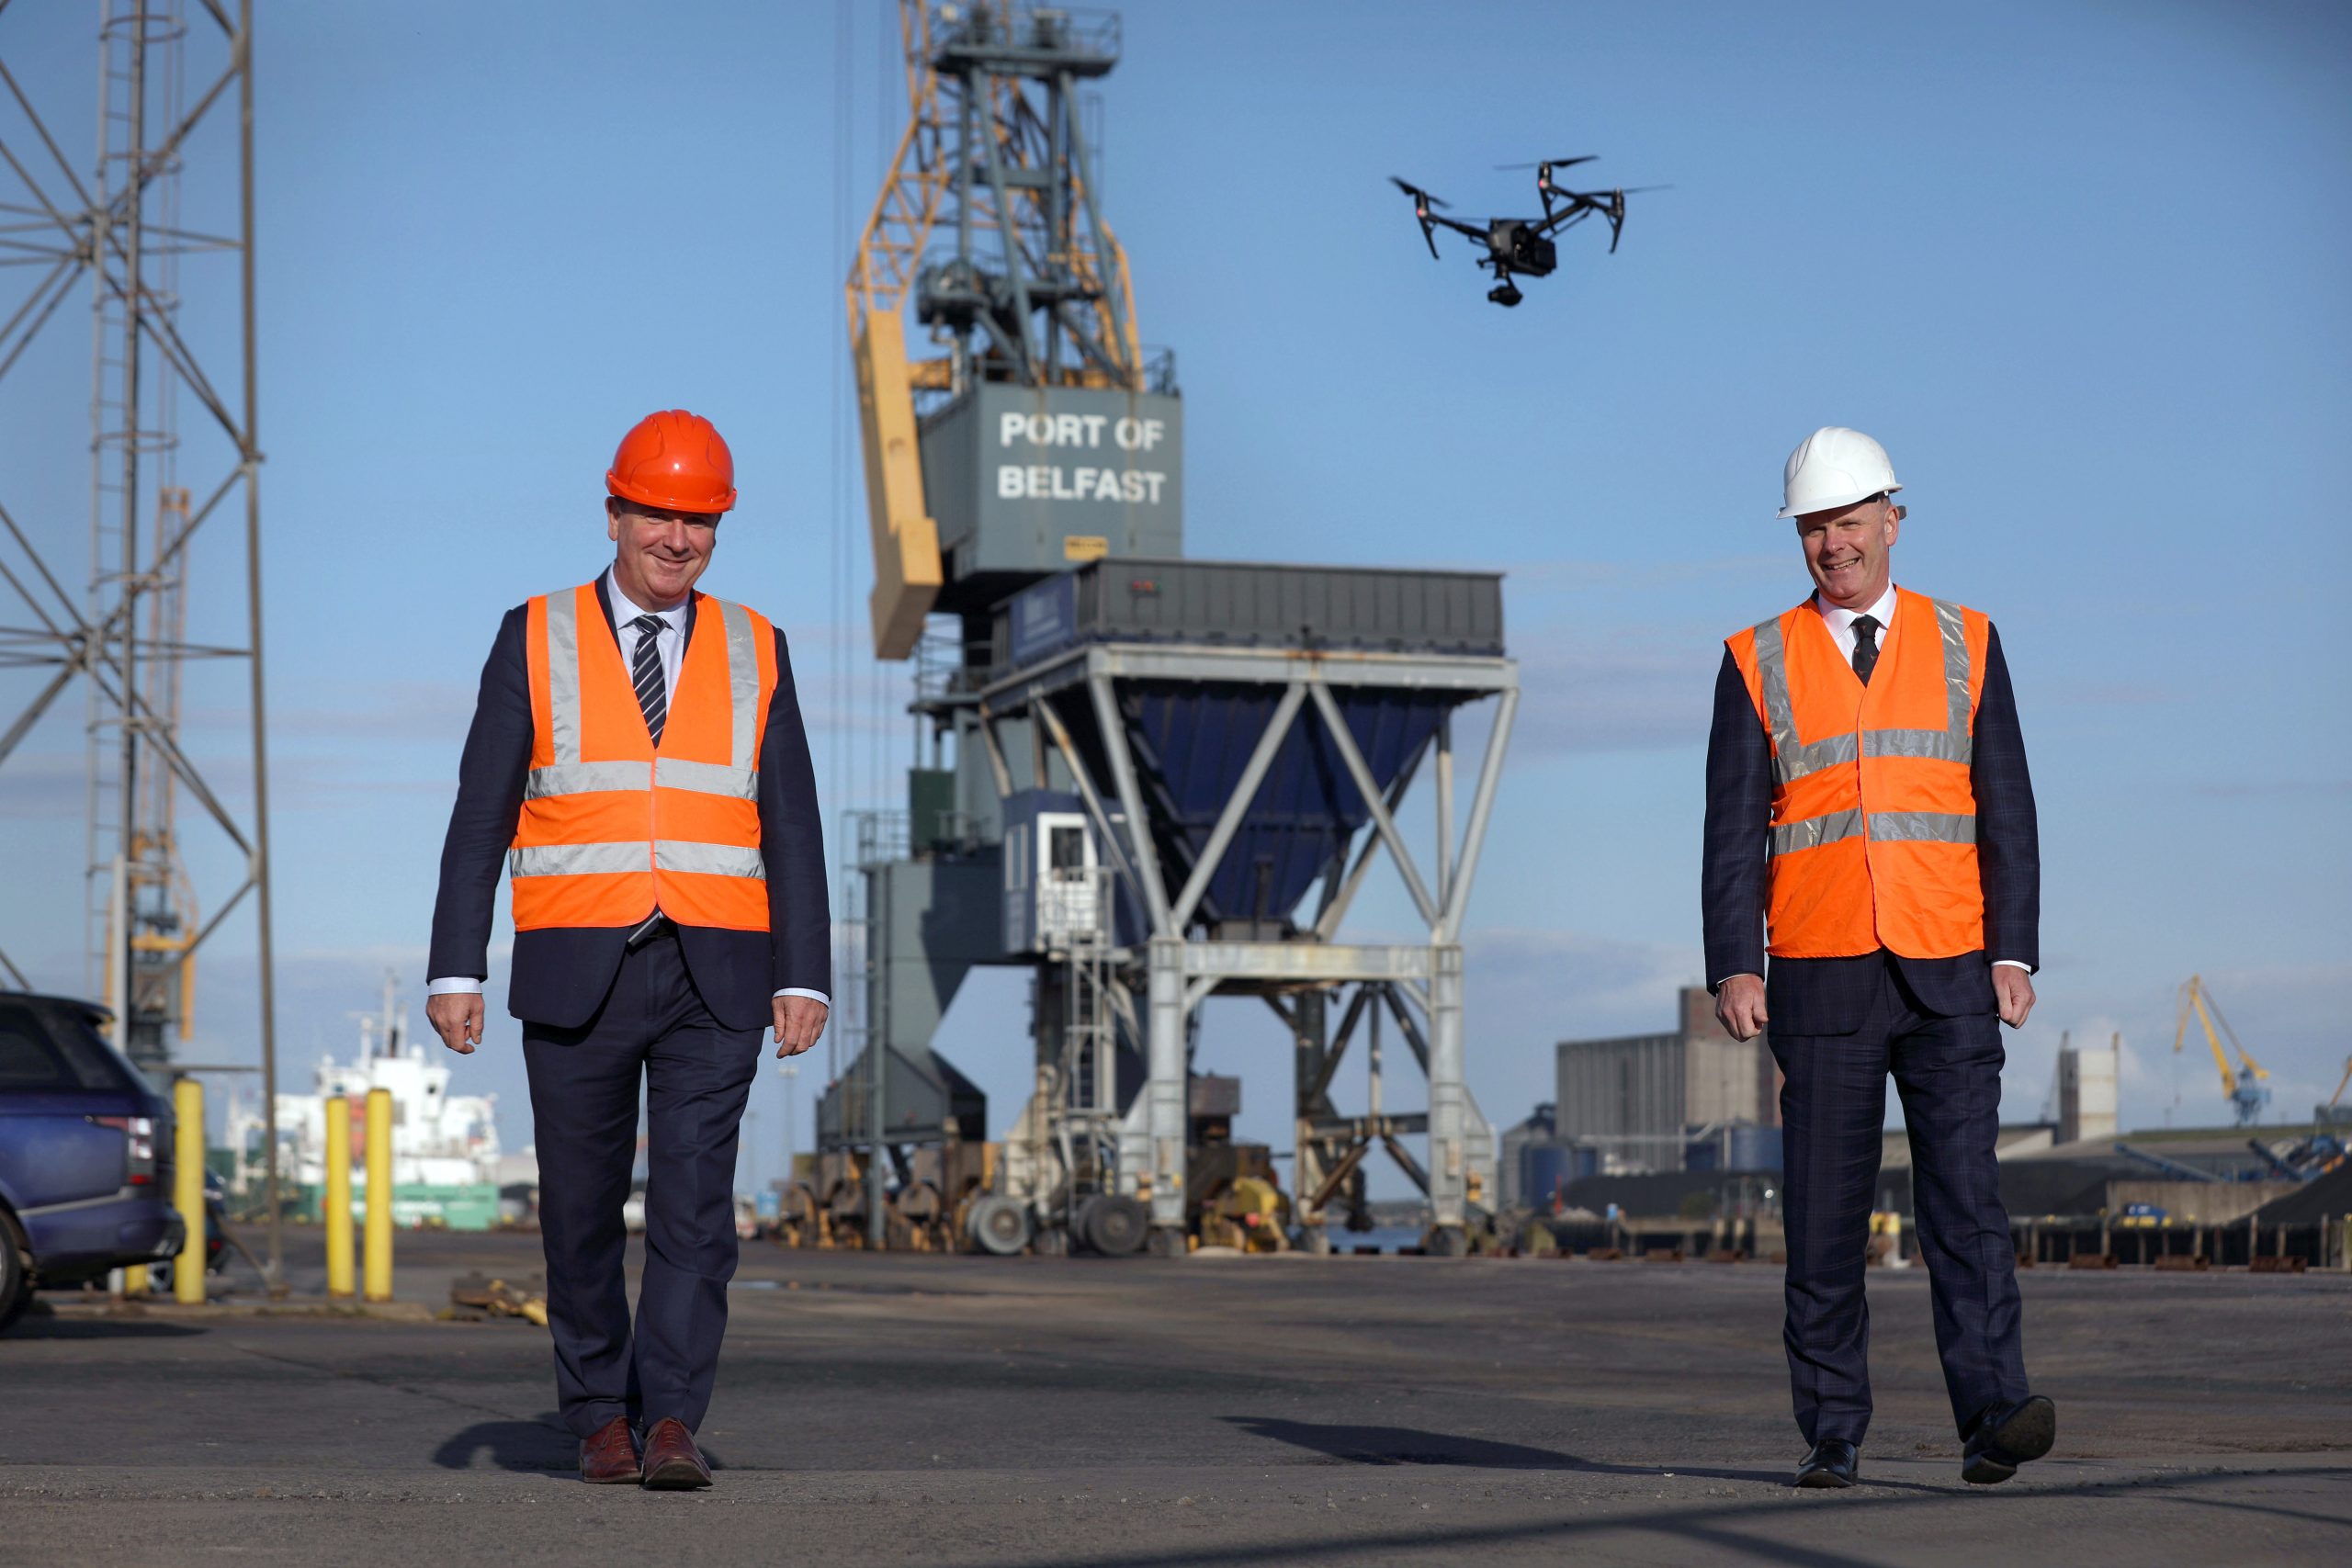 BT and Belfast Harbour partner to build the UK and Ireland's first 5G private network for ports